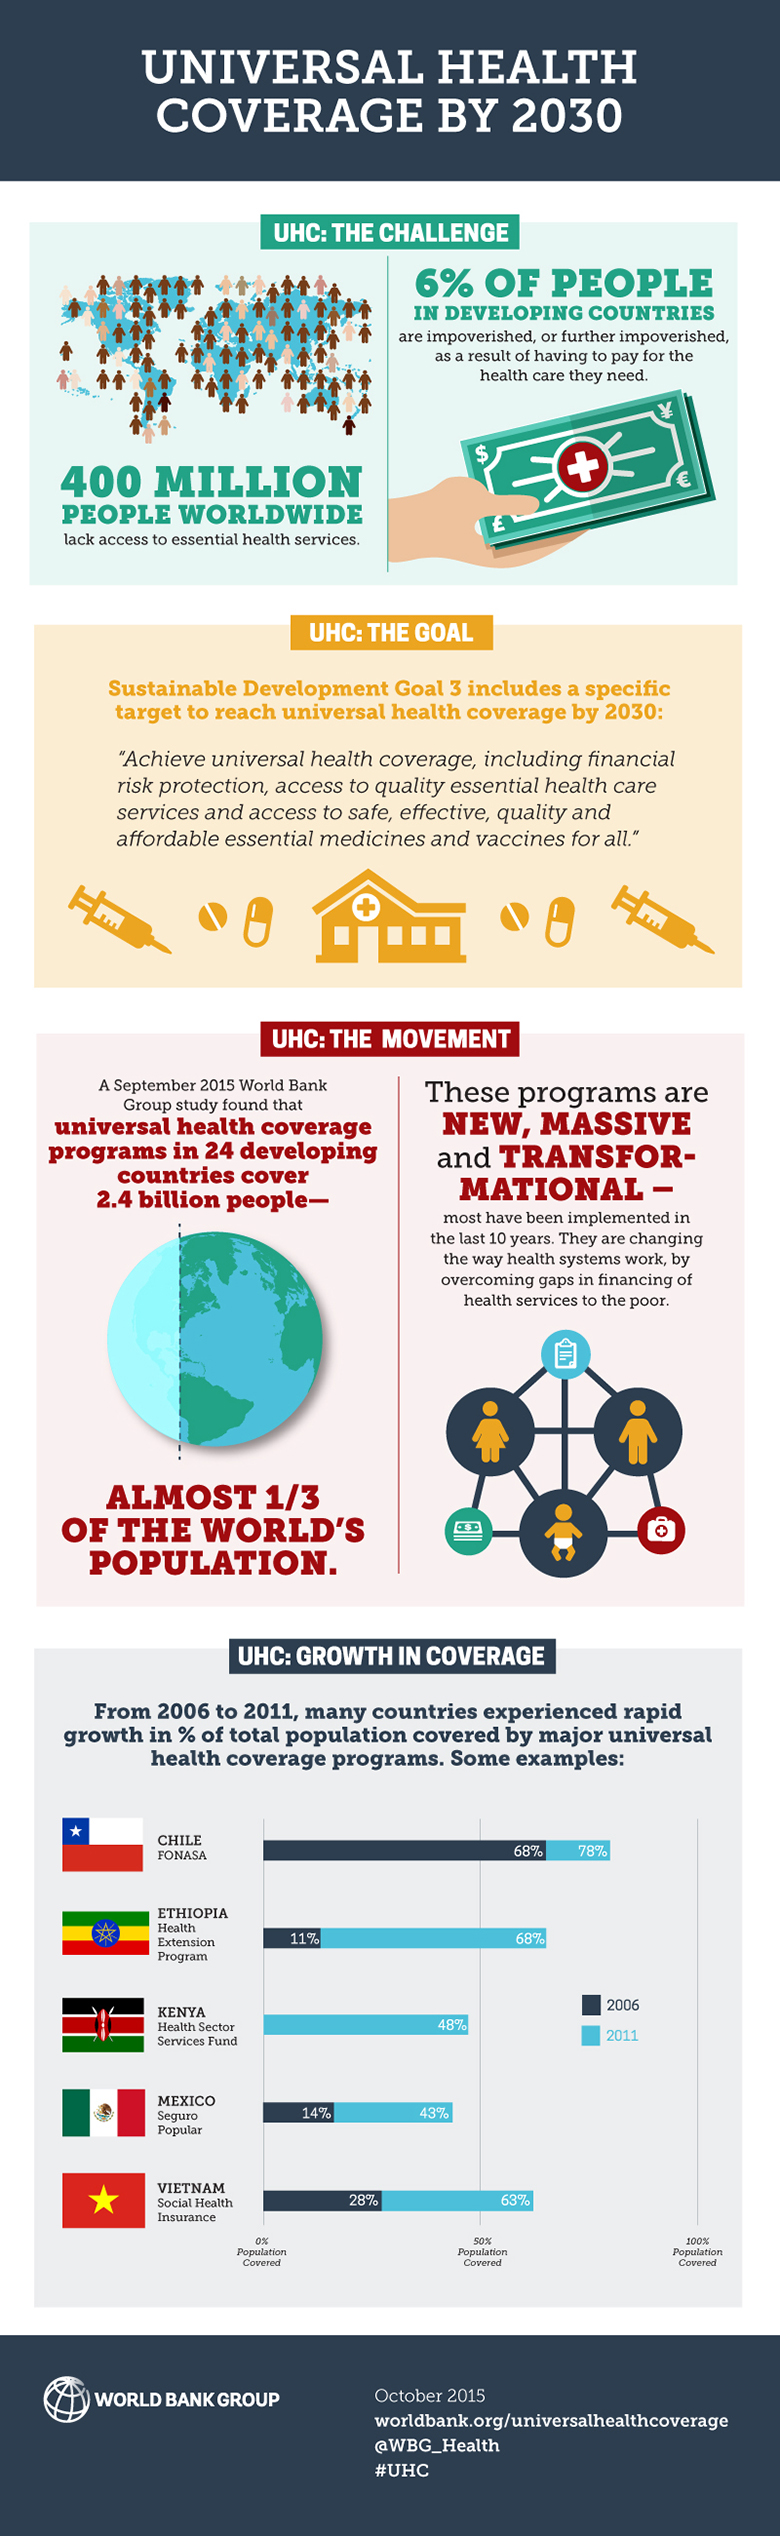 Infographic: Universal Health Coverage by 2030